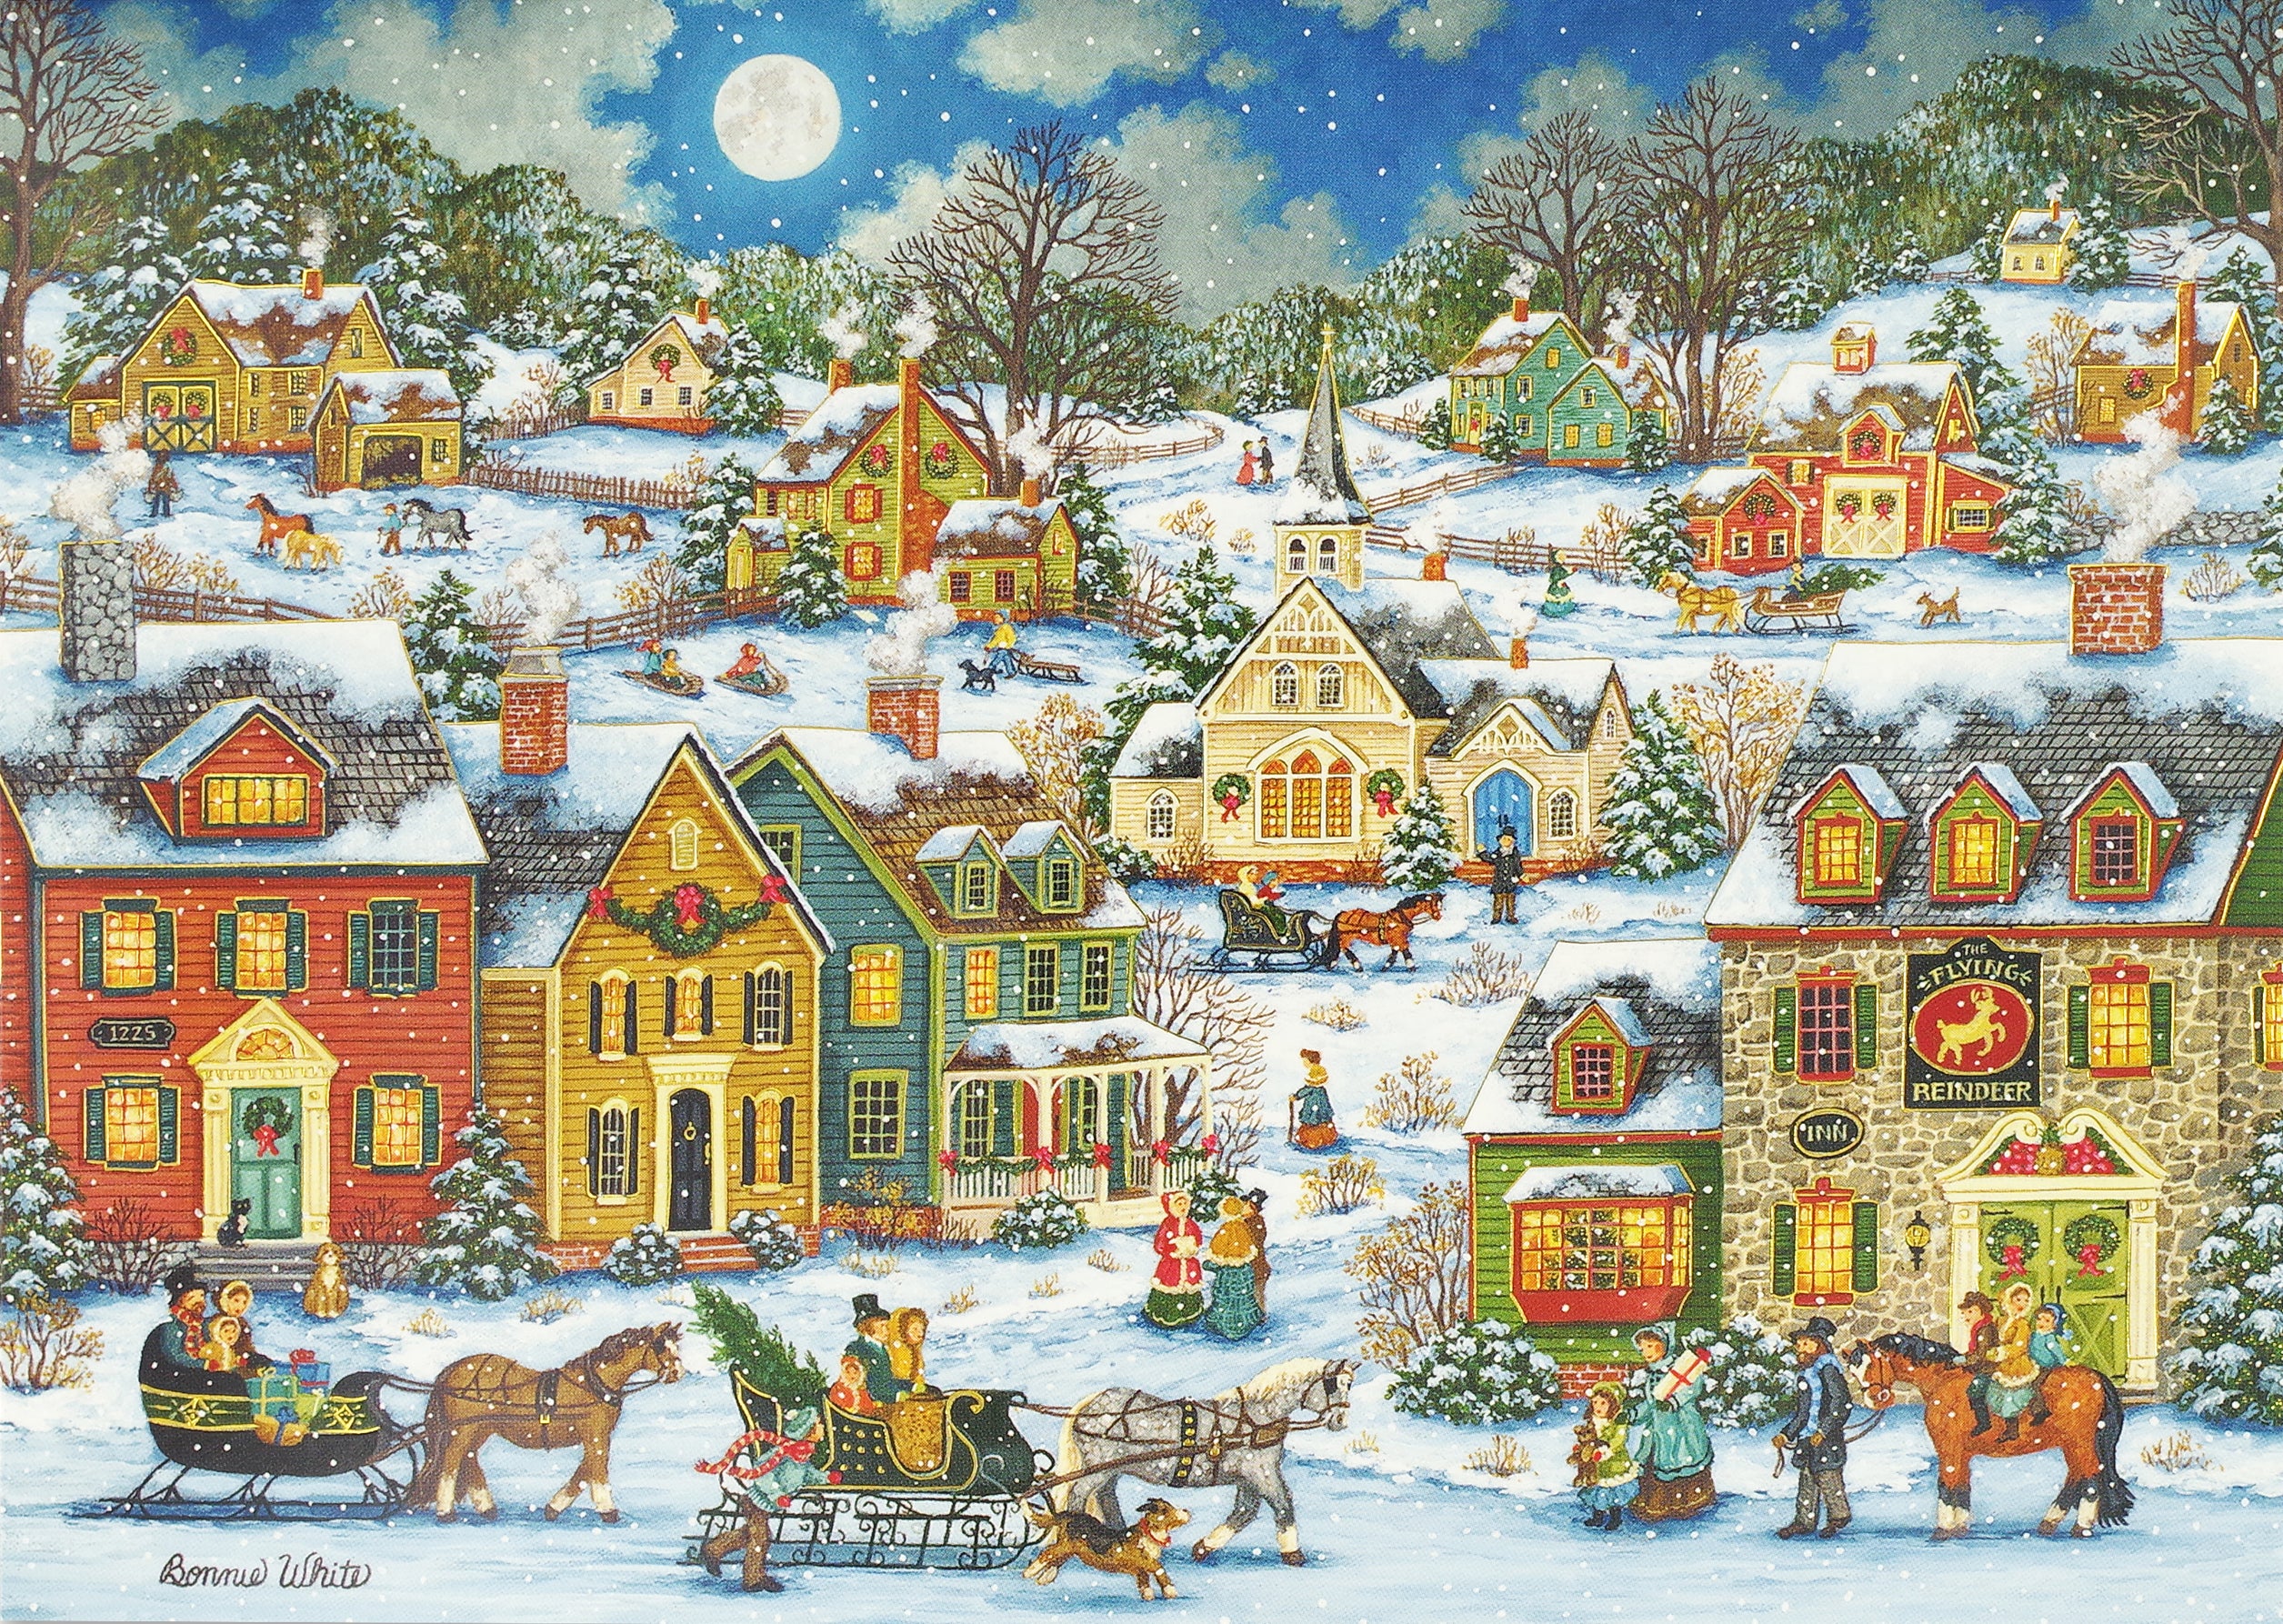 Deluxe Boxed Christmas Cards - Festive Village    